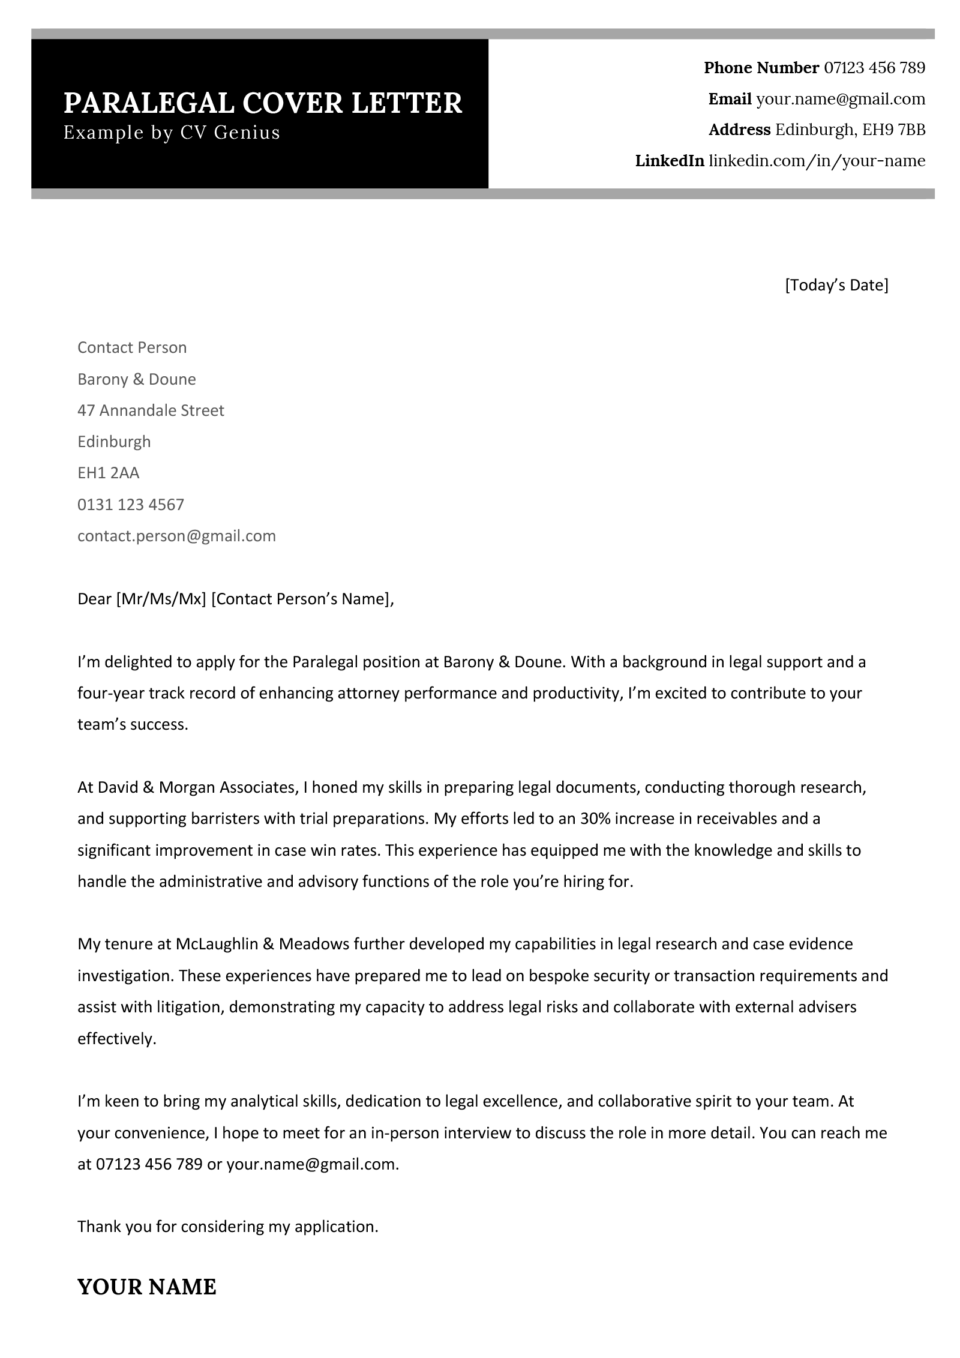 A black and white paralegal cover letter example with a black header and several paragraphs laying out the applicant's experience and skills.